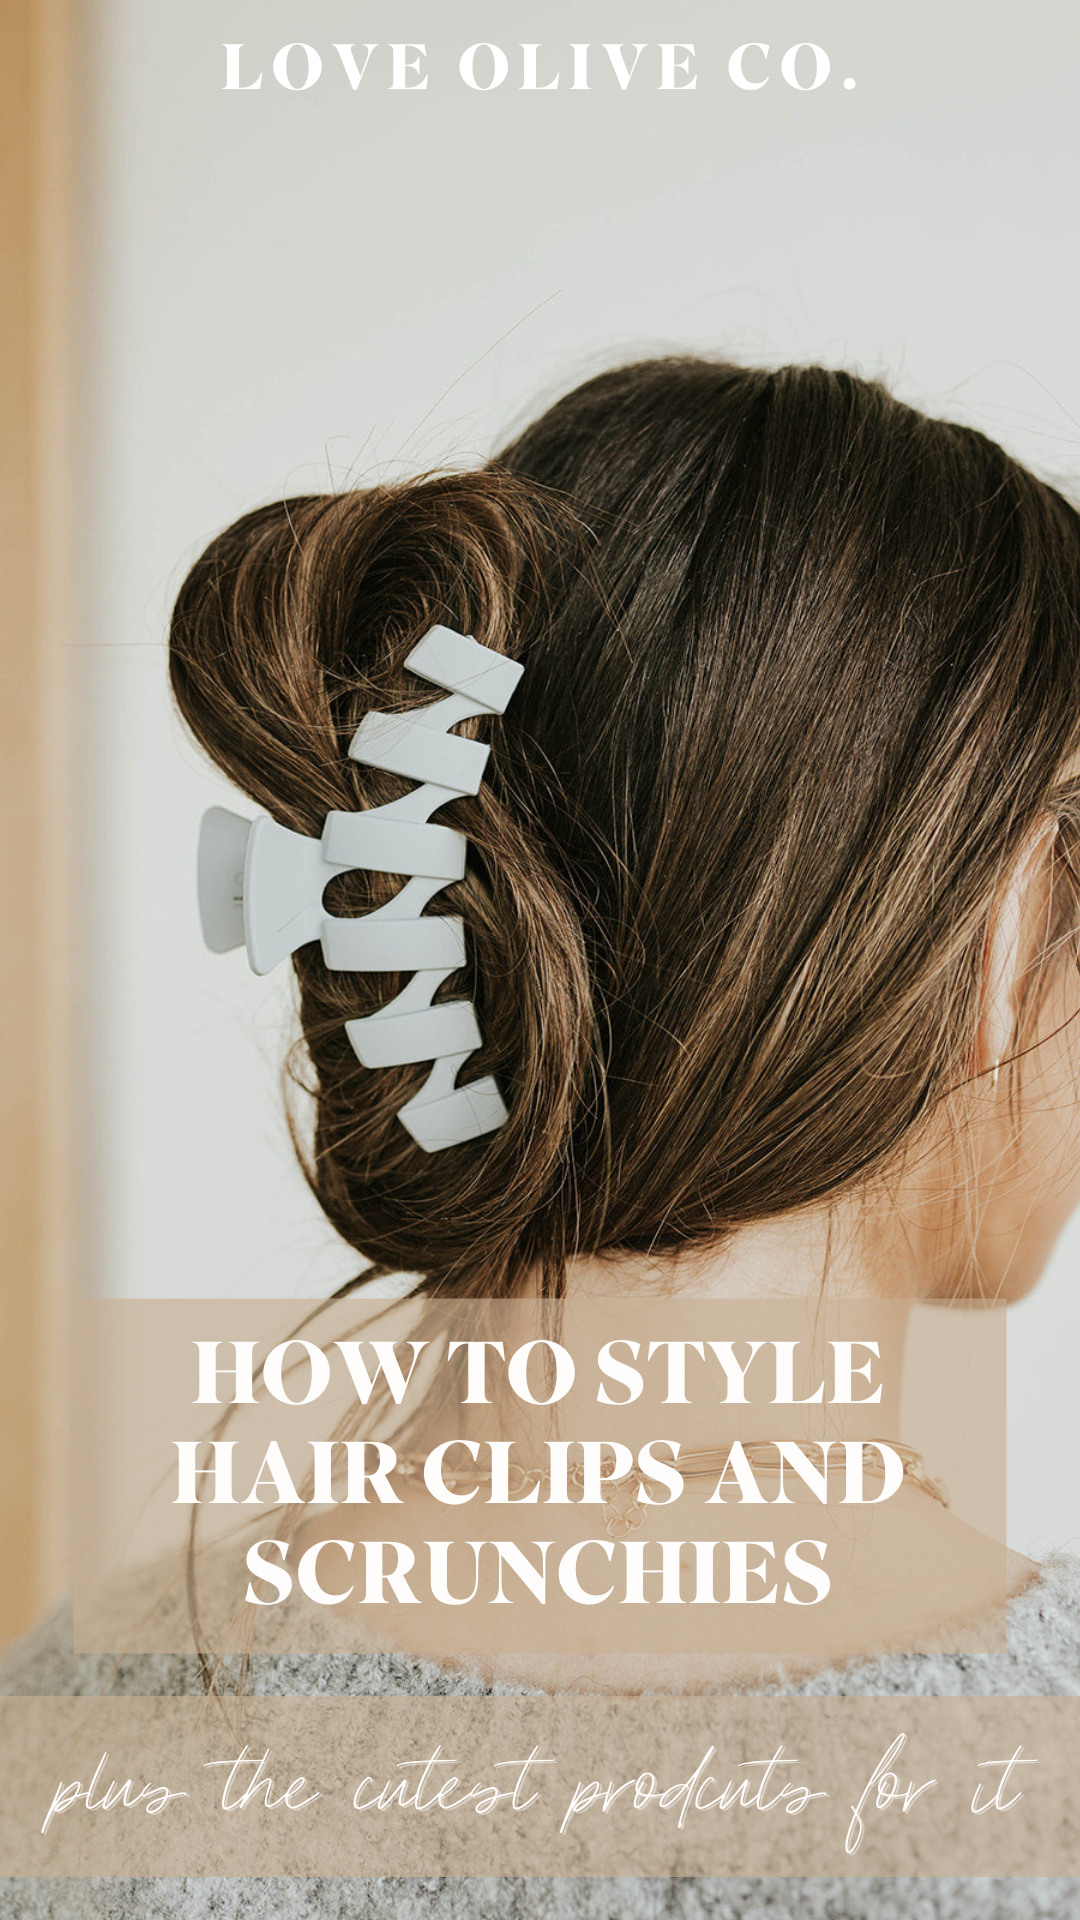 how to style hair clips and scrunchies. www.www.loveoliveshop.com